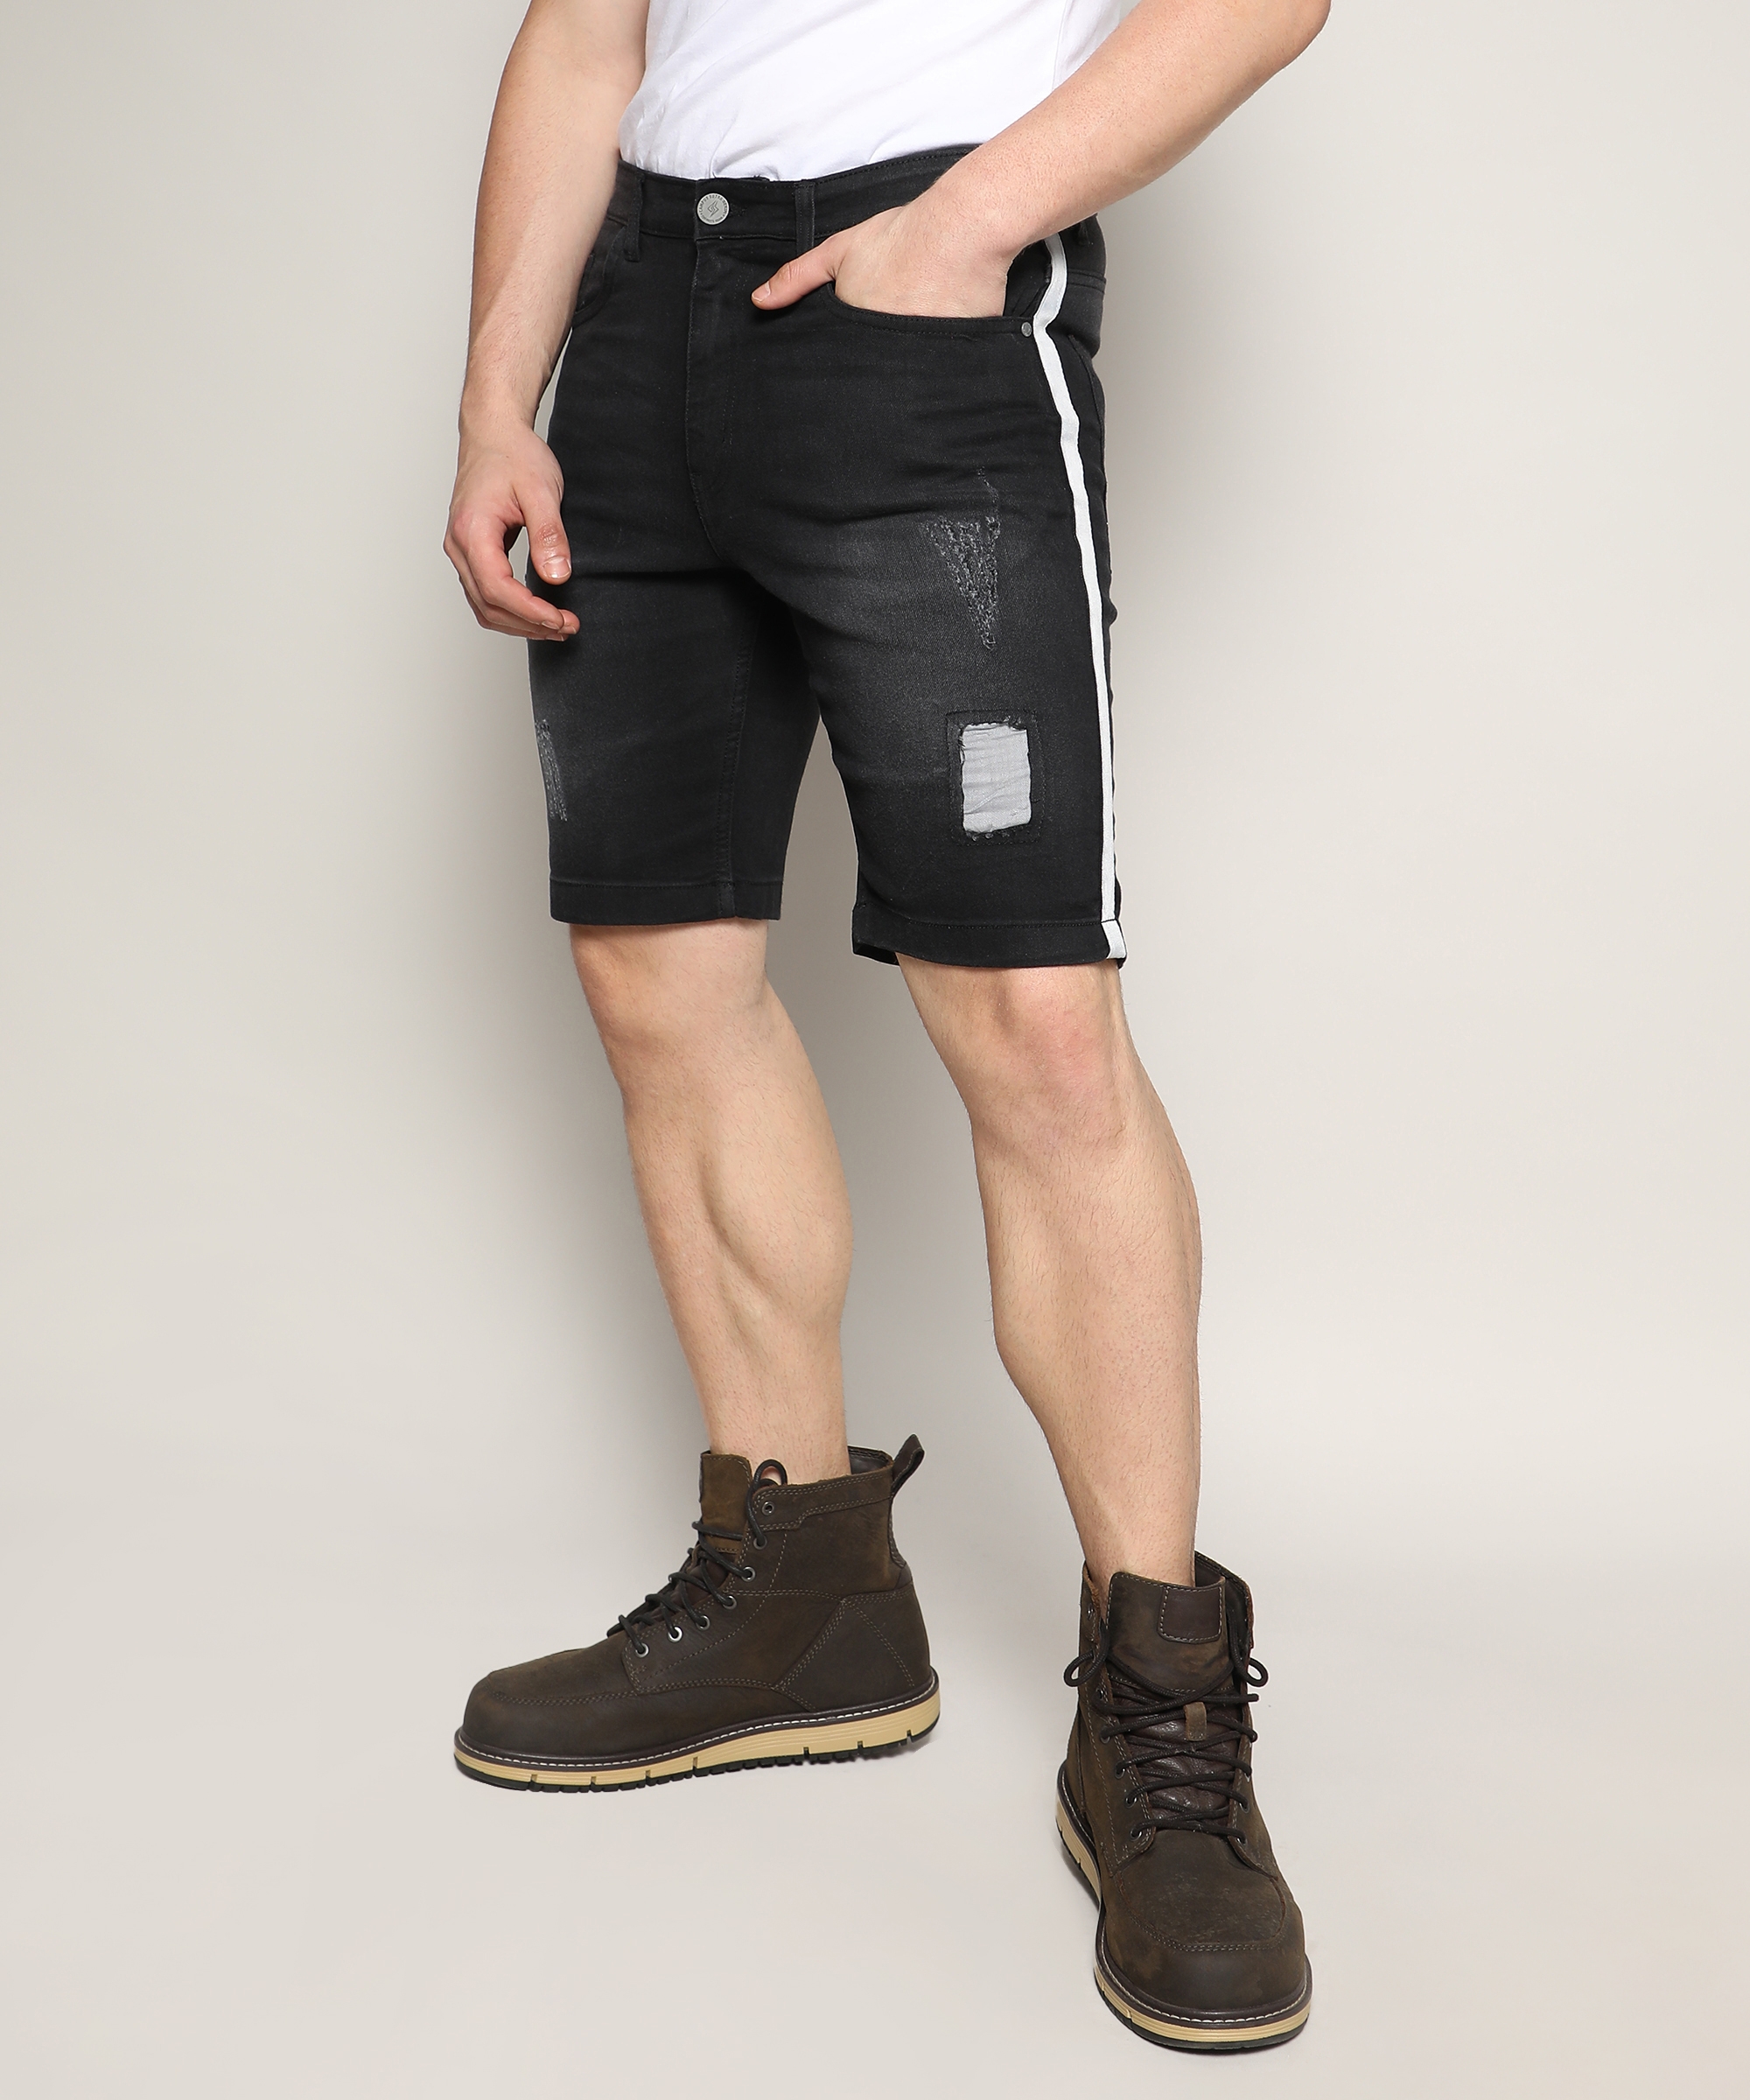 CAMPUS SUTRA | Men's Charcoal Black Ripped Shorts